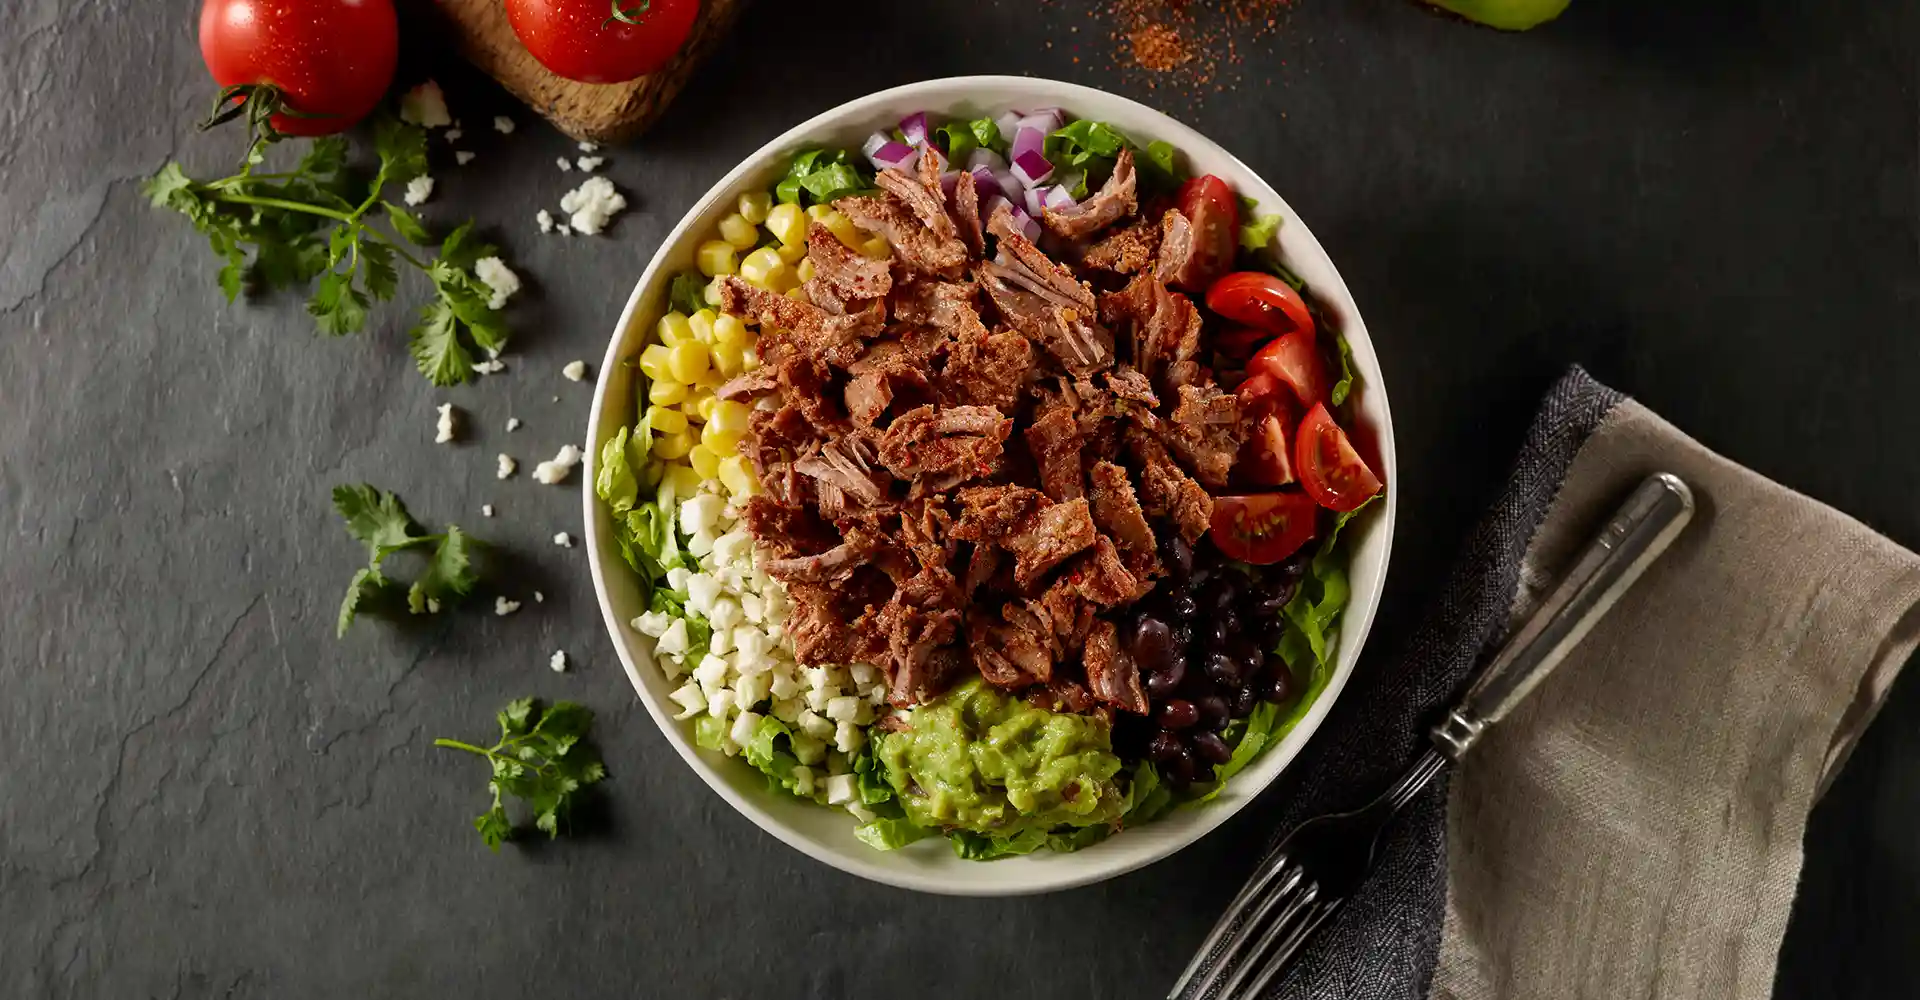 Brisket Burrito Bowl made with Truly Simple Smokehouse Chipotle Beef Brisket